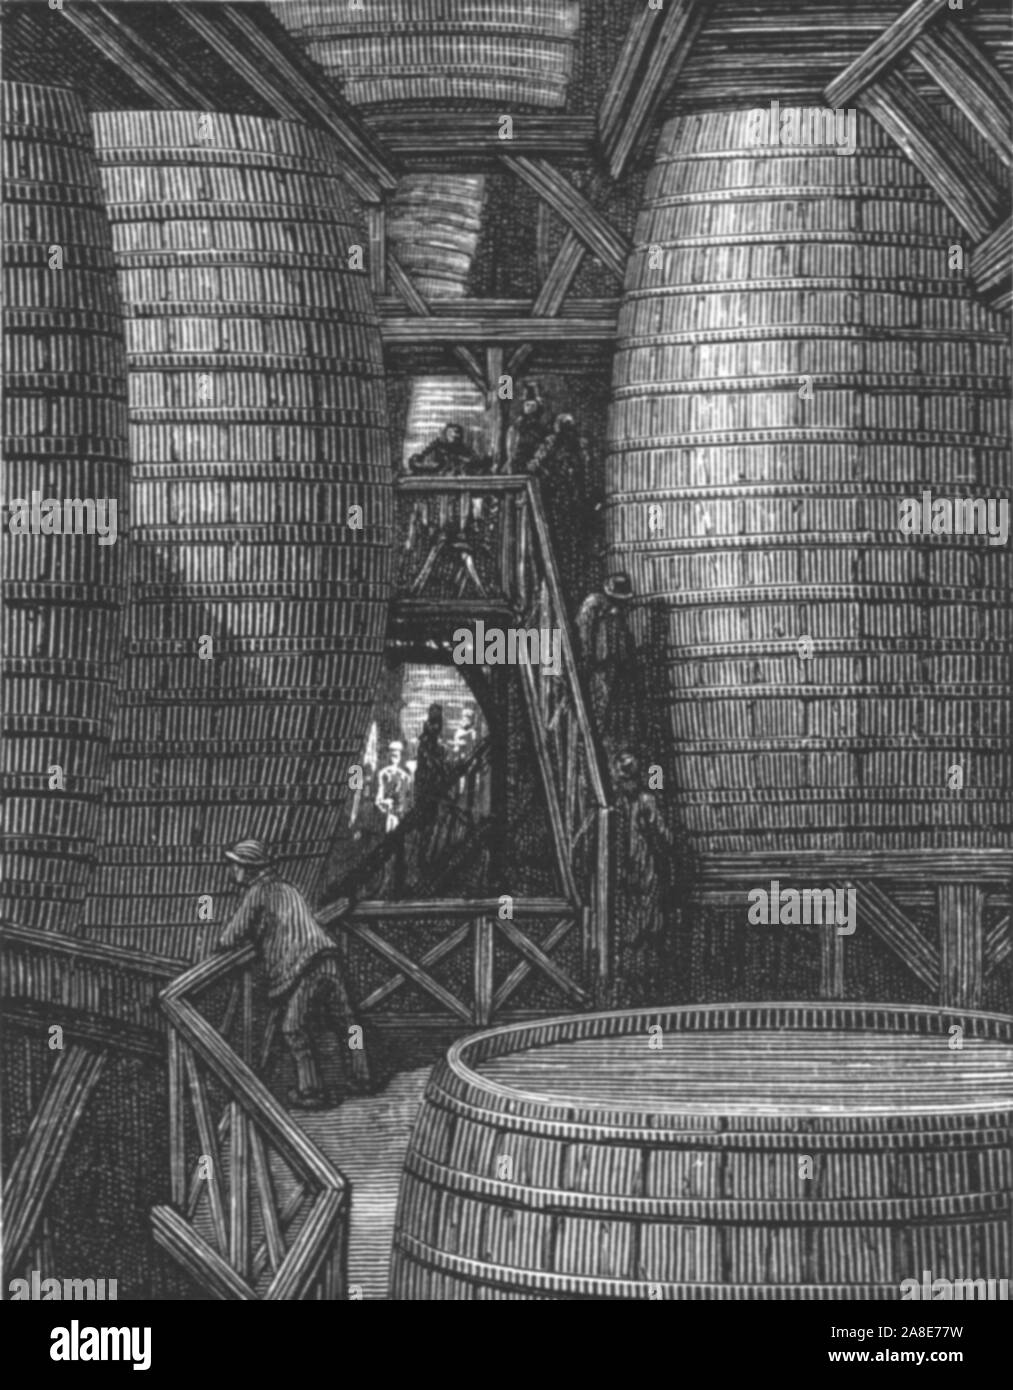 'In the Brewery', 1872. Barclay, Perkins and Company brewery in Park Street, Southwark. From, &quot;LONDON. A Pilgrimage&quot; by Gustave Dore and Blanchard Jerrold. [Grant and Co., 72-78, Turnmill Street, E.C., 1872]. Stock Photo